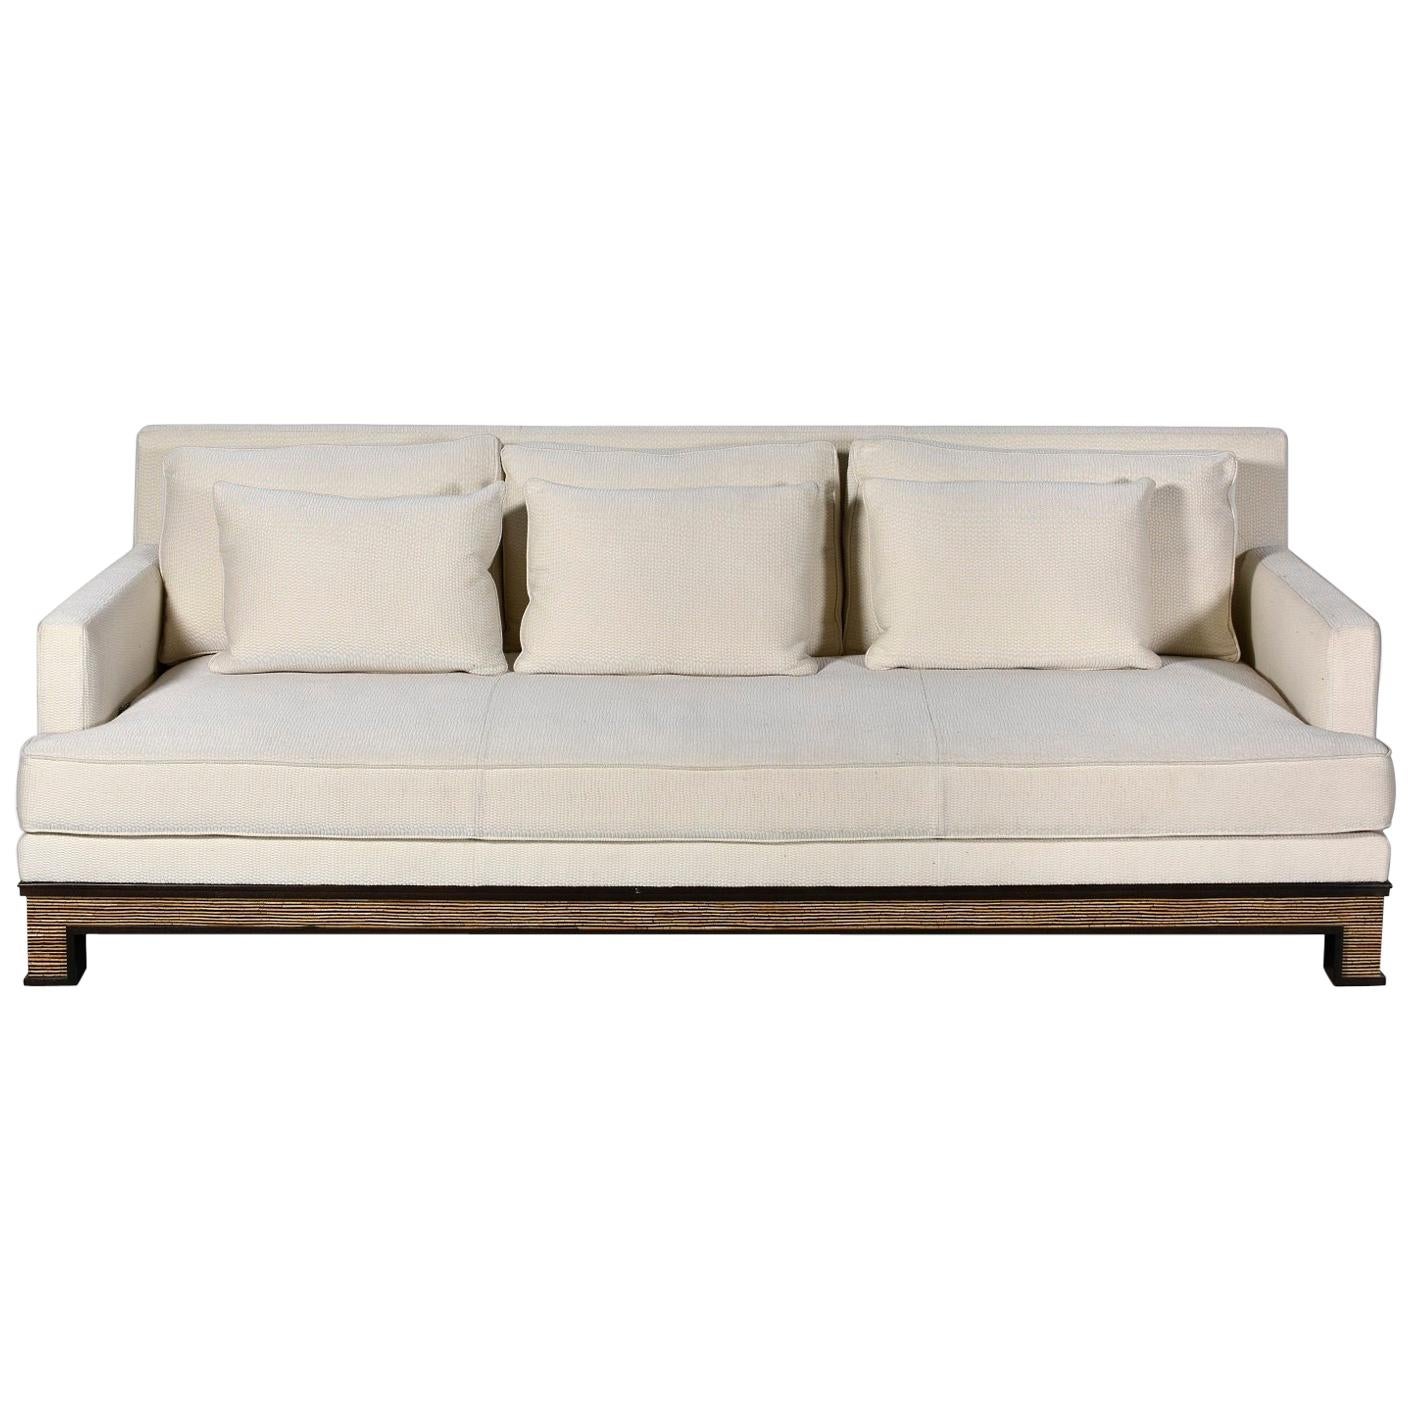 Pinto Paris Ipanema Couch For Sale